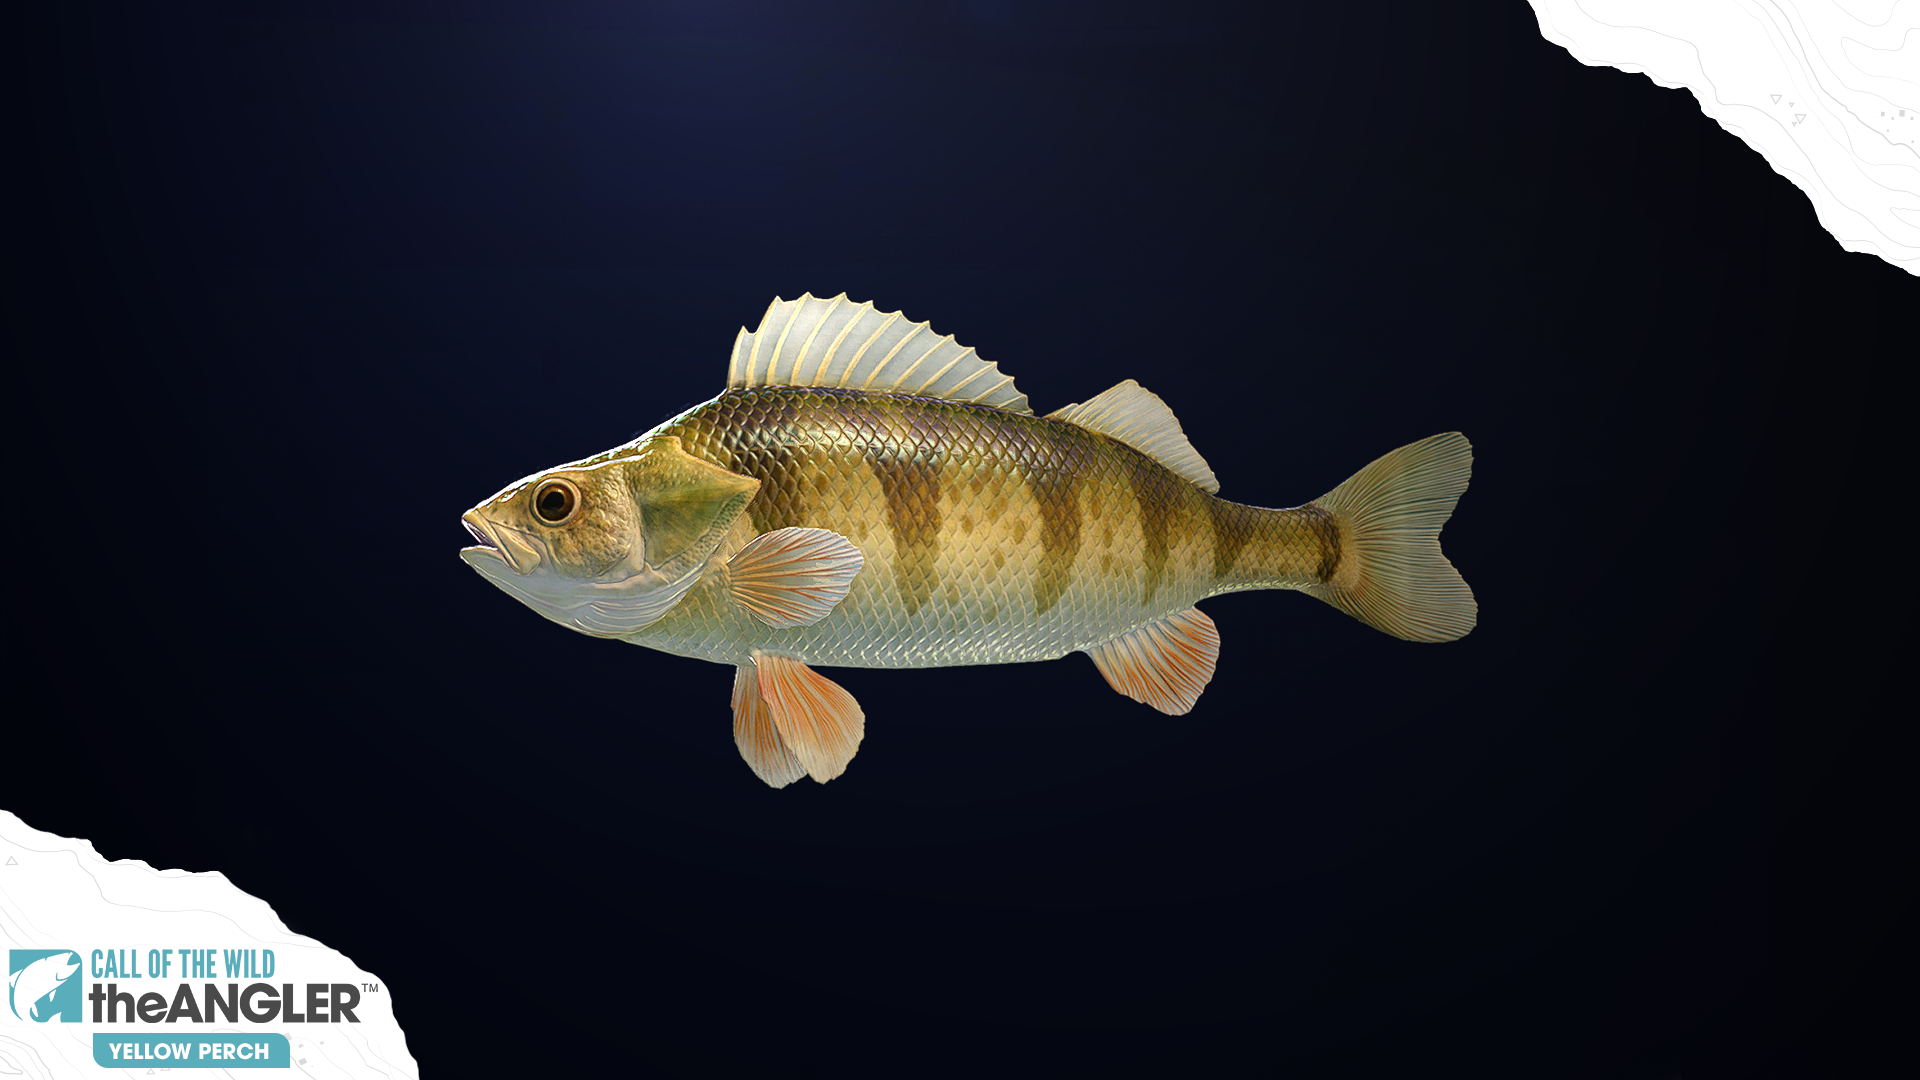 An image of the fish species, Yellow Perch.